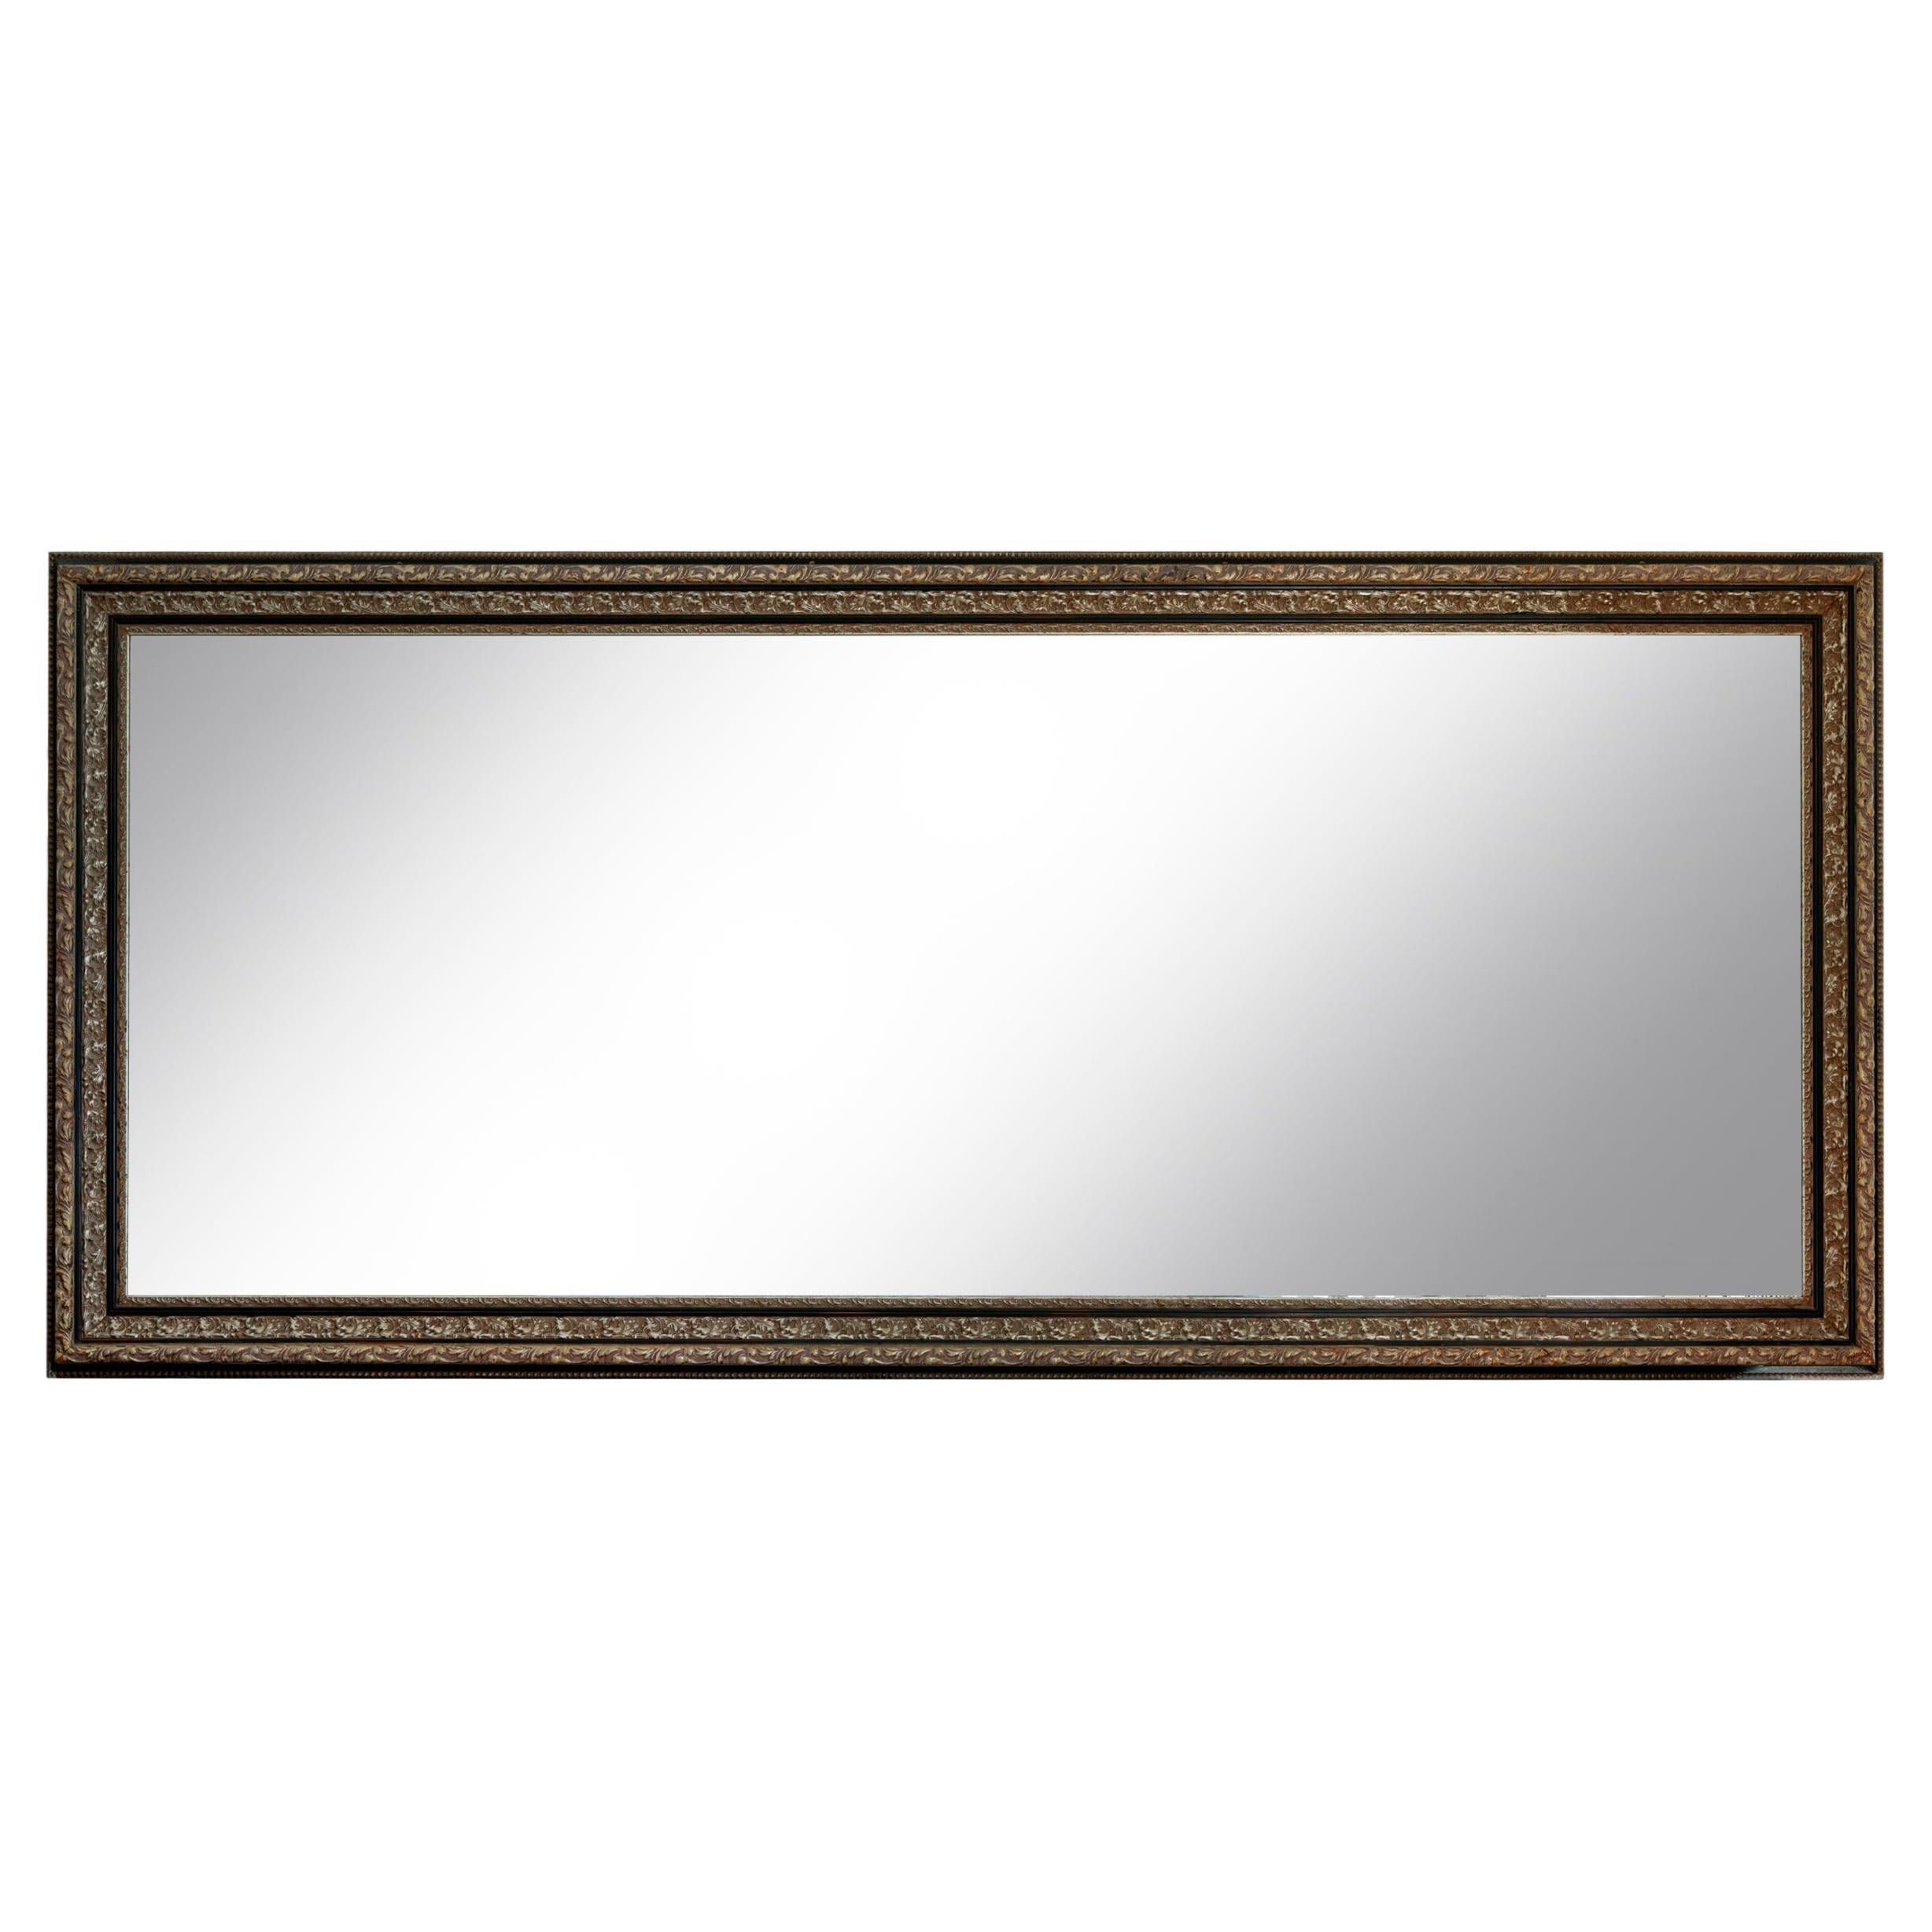 A monumental rectangular silver leaf gilt & carved wood mirror. The long narrow rectangle mirror has a beautiful carved frame. An important piece for a grand space as a standing floor mirror or horizontally above a fireplace or credenza. The